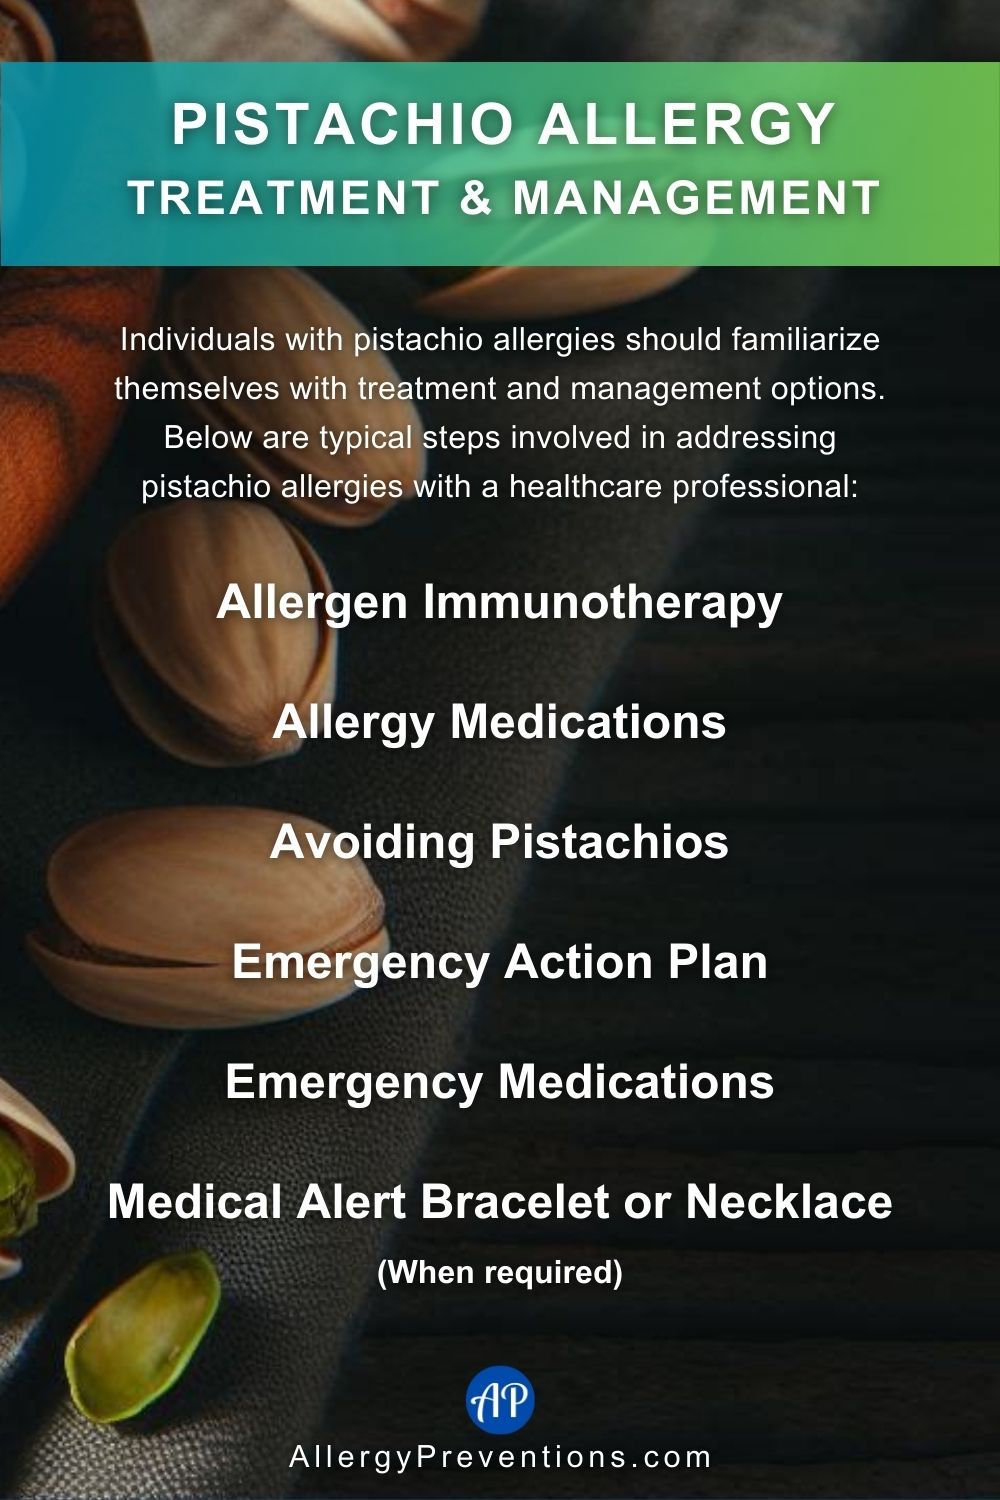 Pistachio Allergy Treatment & Management Infographic. Individuals with pistachio allergies should familiarize themselves with treatment and management options. Below are typical steps involved in addressing pistachio allergies with a healthcare professional: Allergen Immunotherapy, Allergy Medications, Avoiding Pistachios, Emergency Action Plan, Emergency Medications, Medical, Alert Bracelet or Necklace (When required).